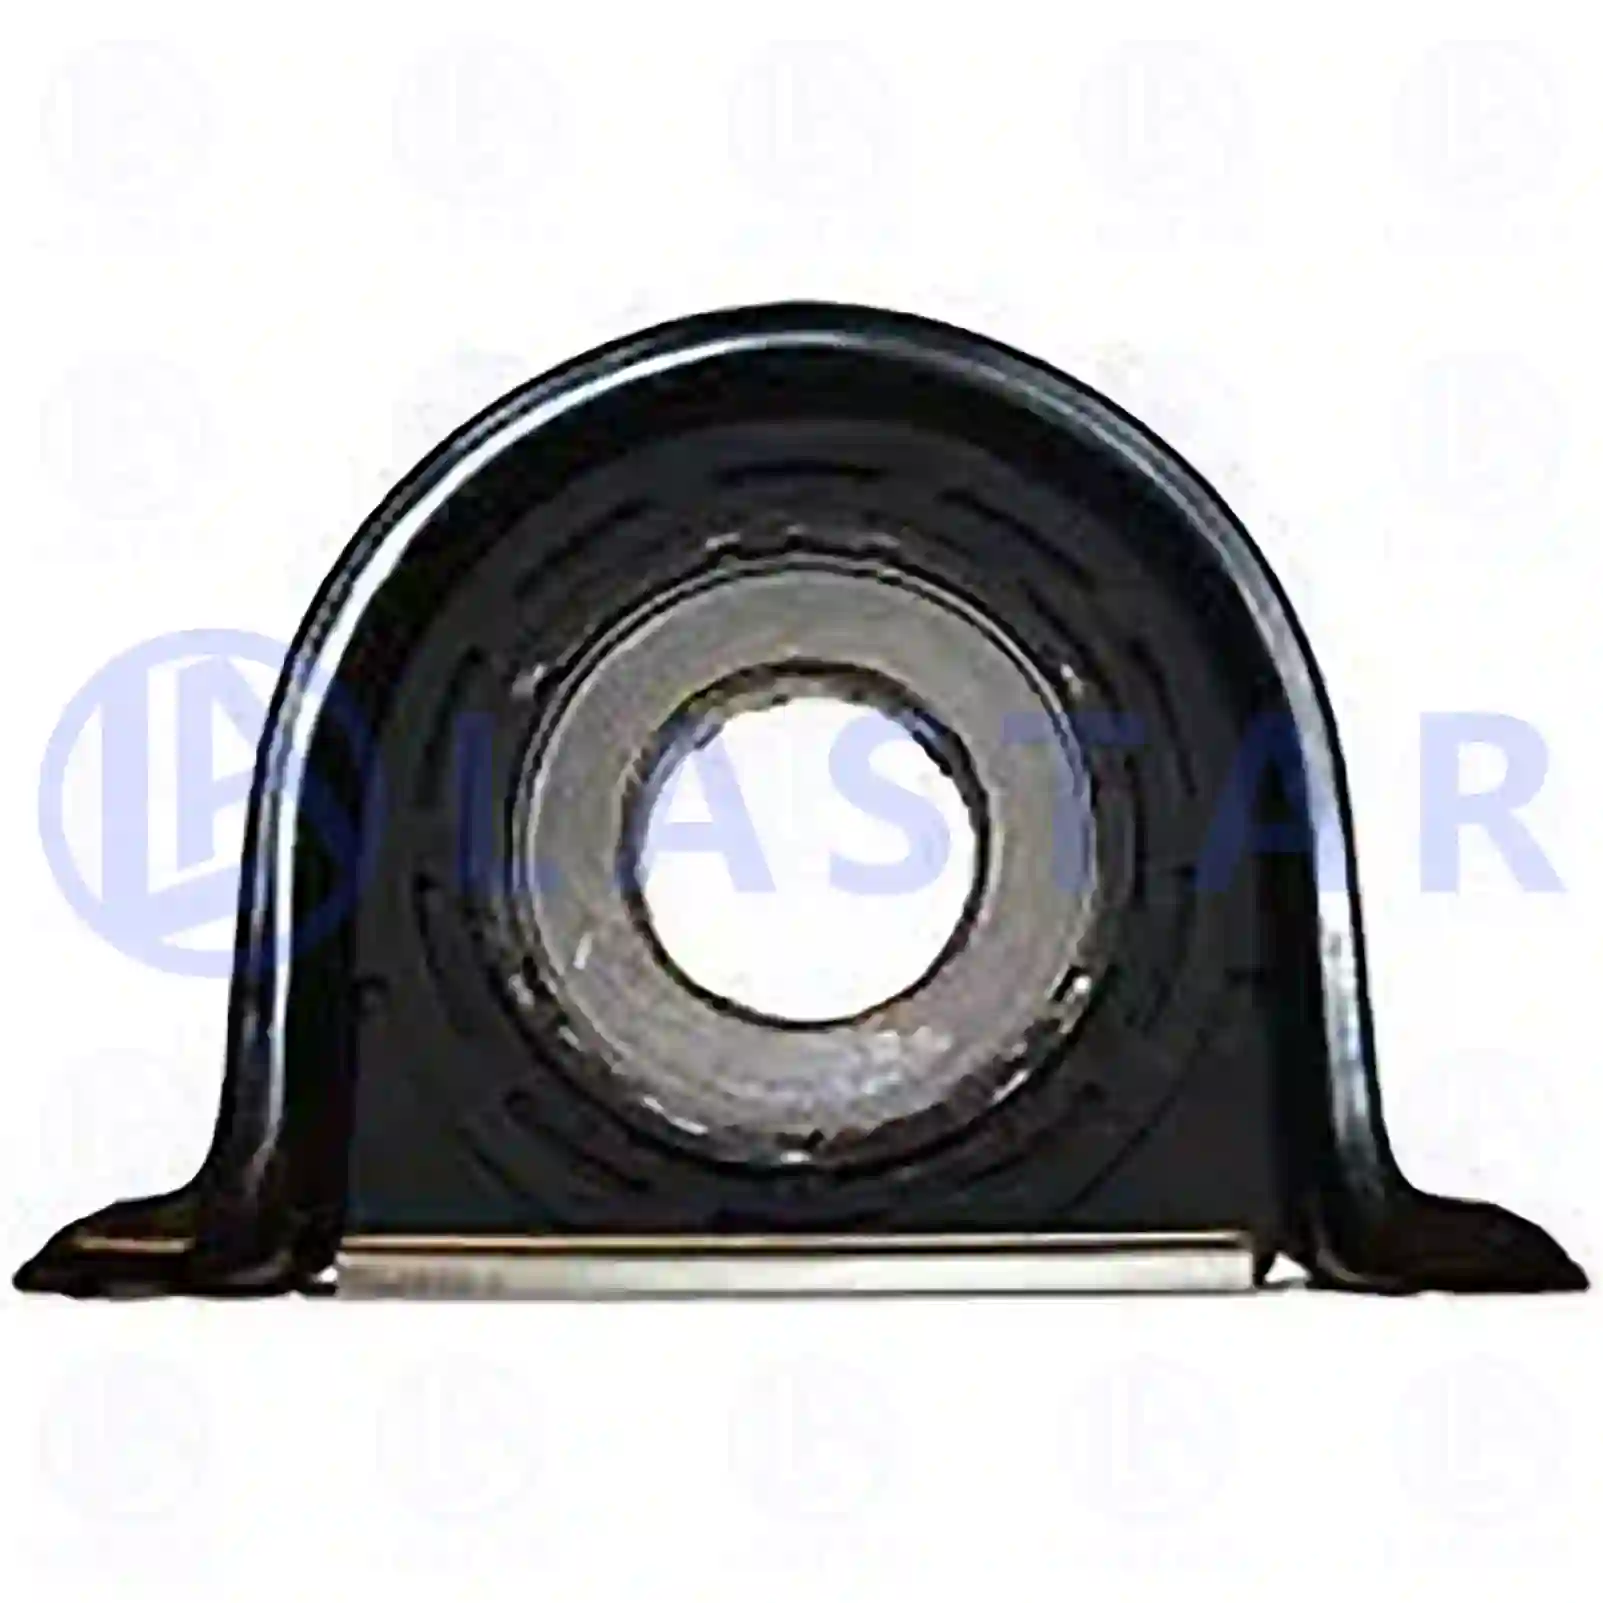 Center bearing, 77734329, 5001858085 ||  77734329 Lastar Spare Part | Truck Spare Parts, Auotomotive Spare Parts Center bearing, 77734329, 5001858085 ||  77734329 Lastar Spare Part | Truck Spare Parts, Auotomotive Spare Parts